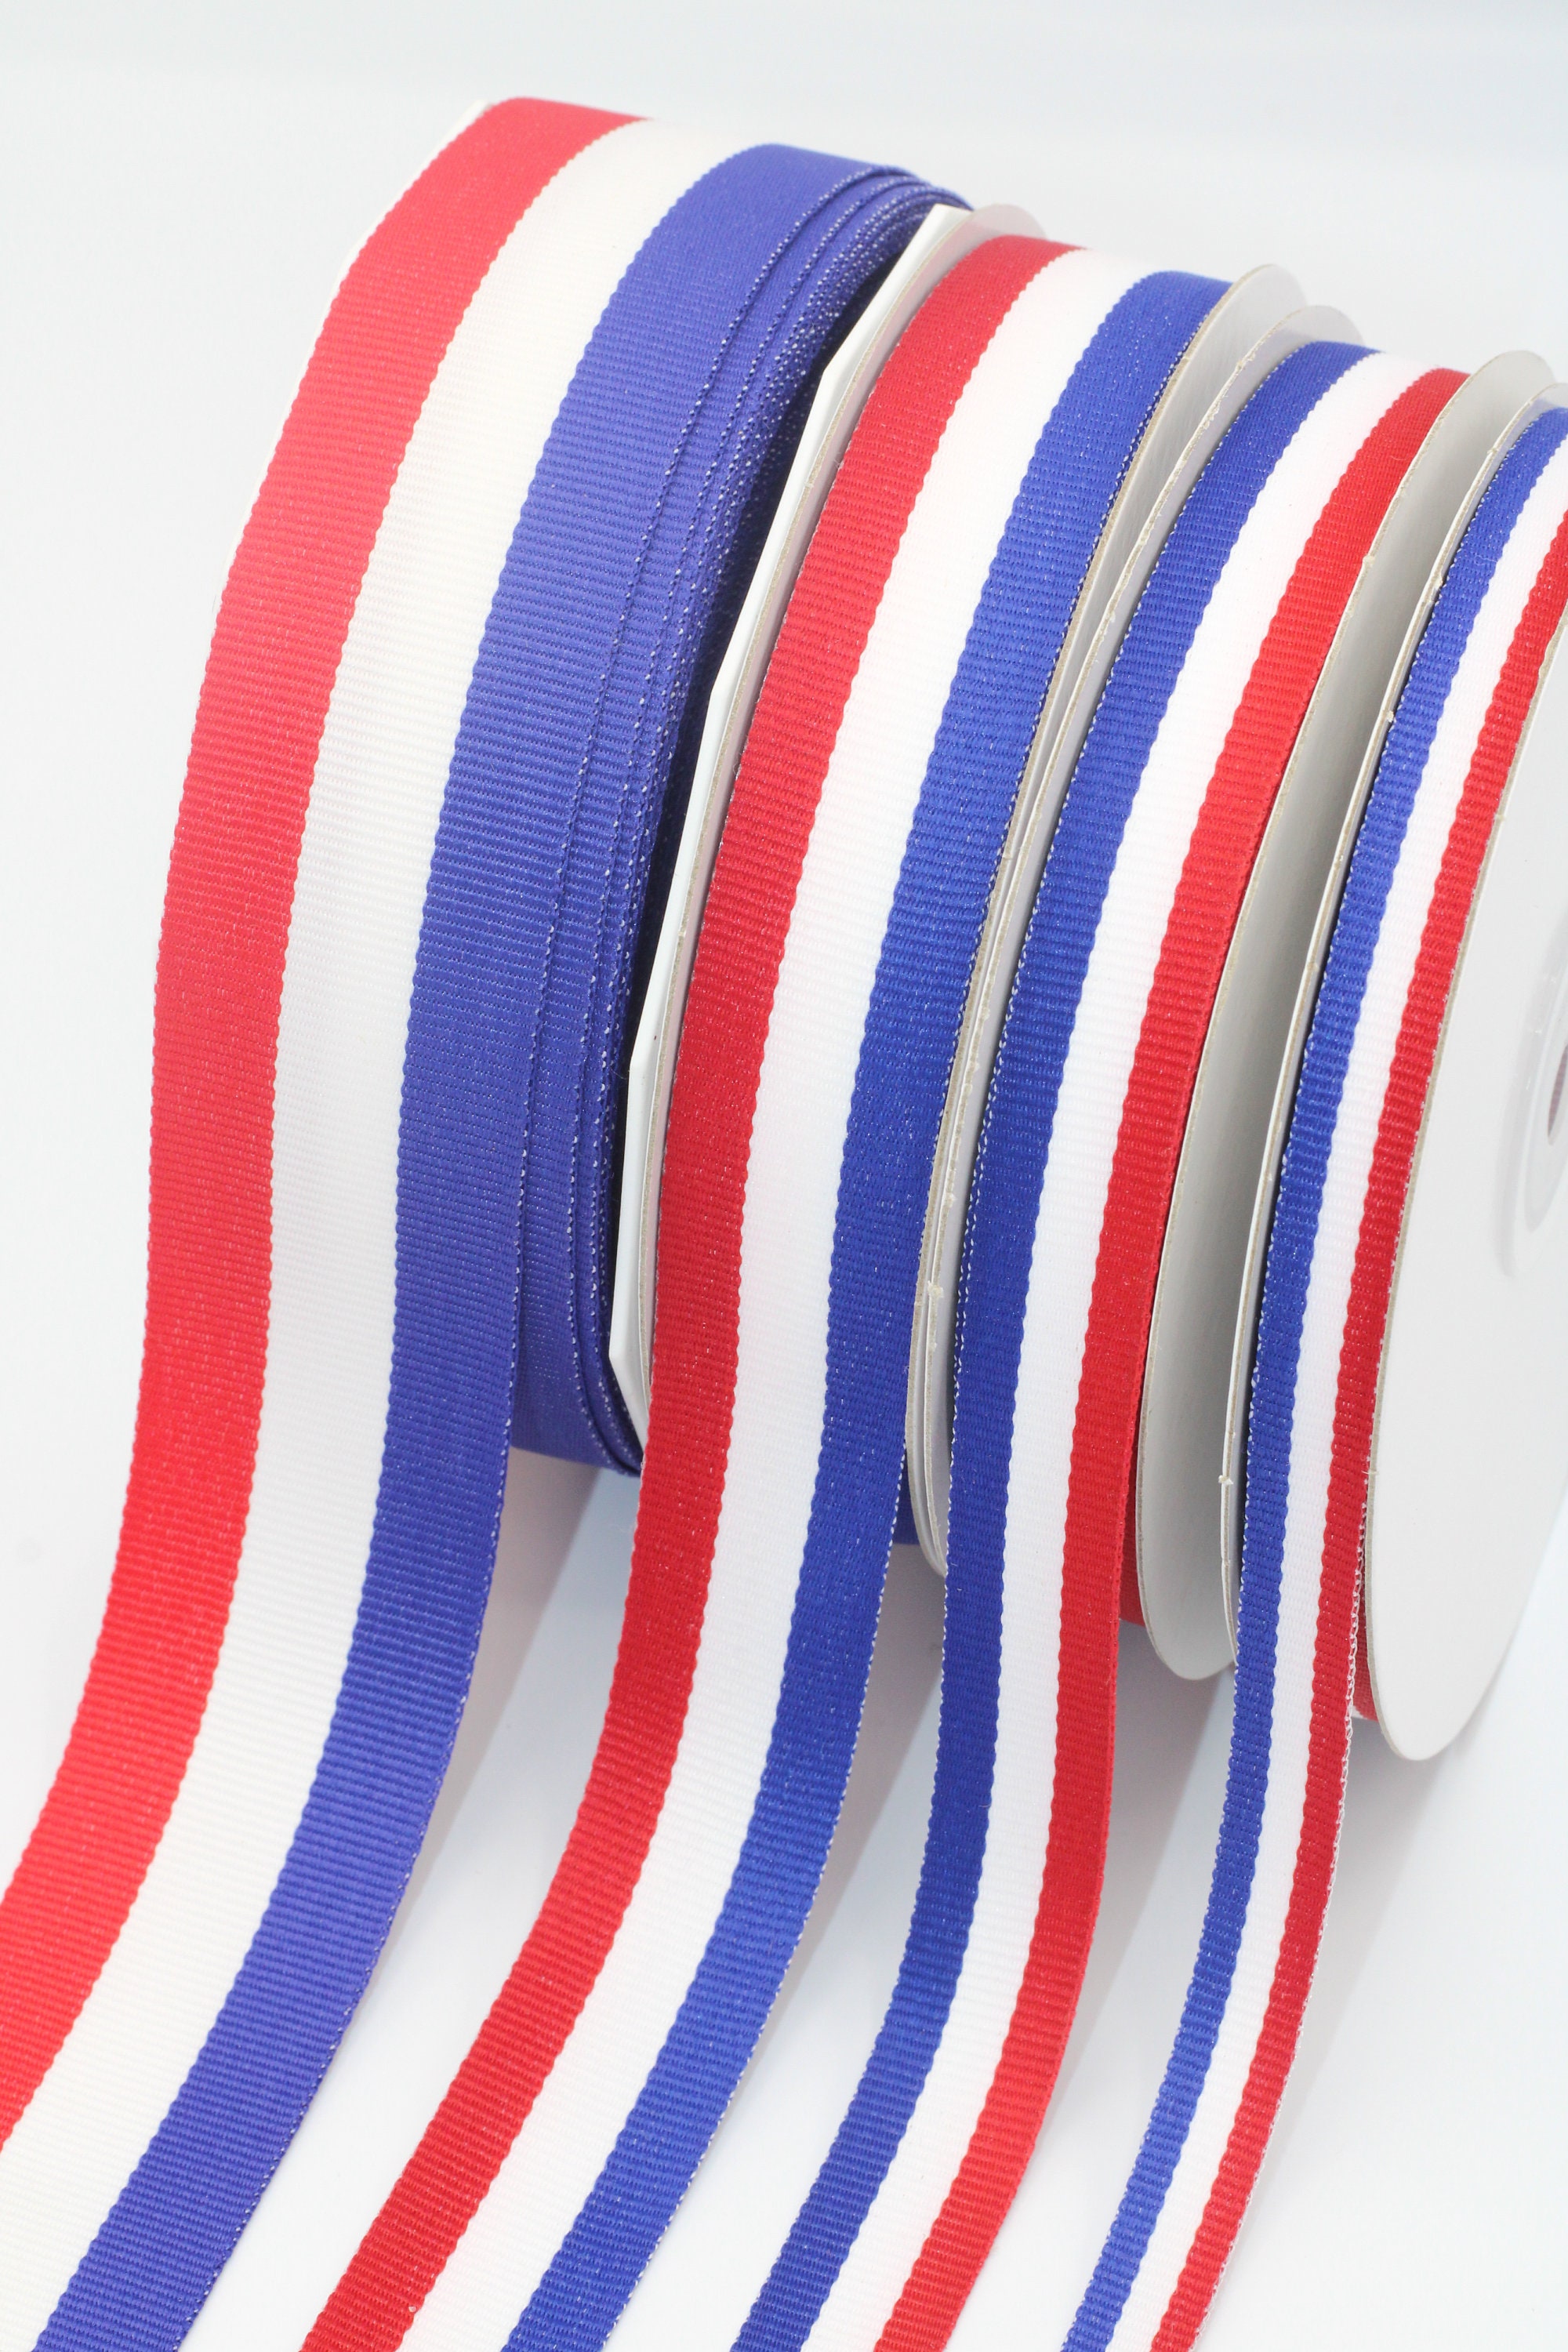 Red White and Blue Ribbon 